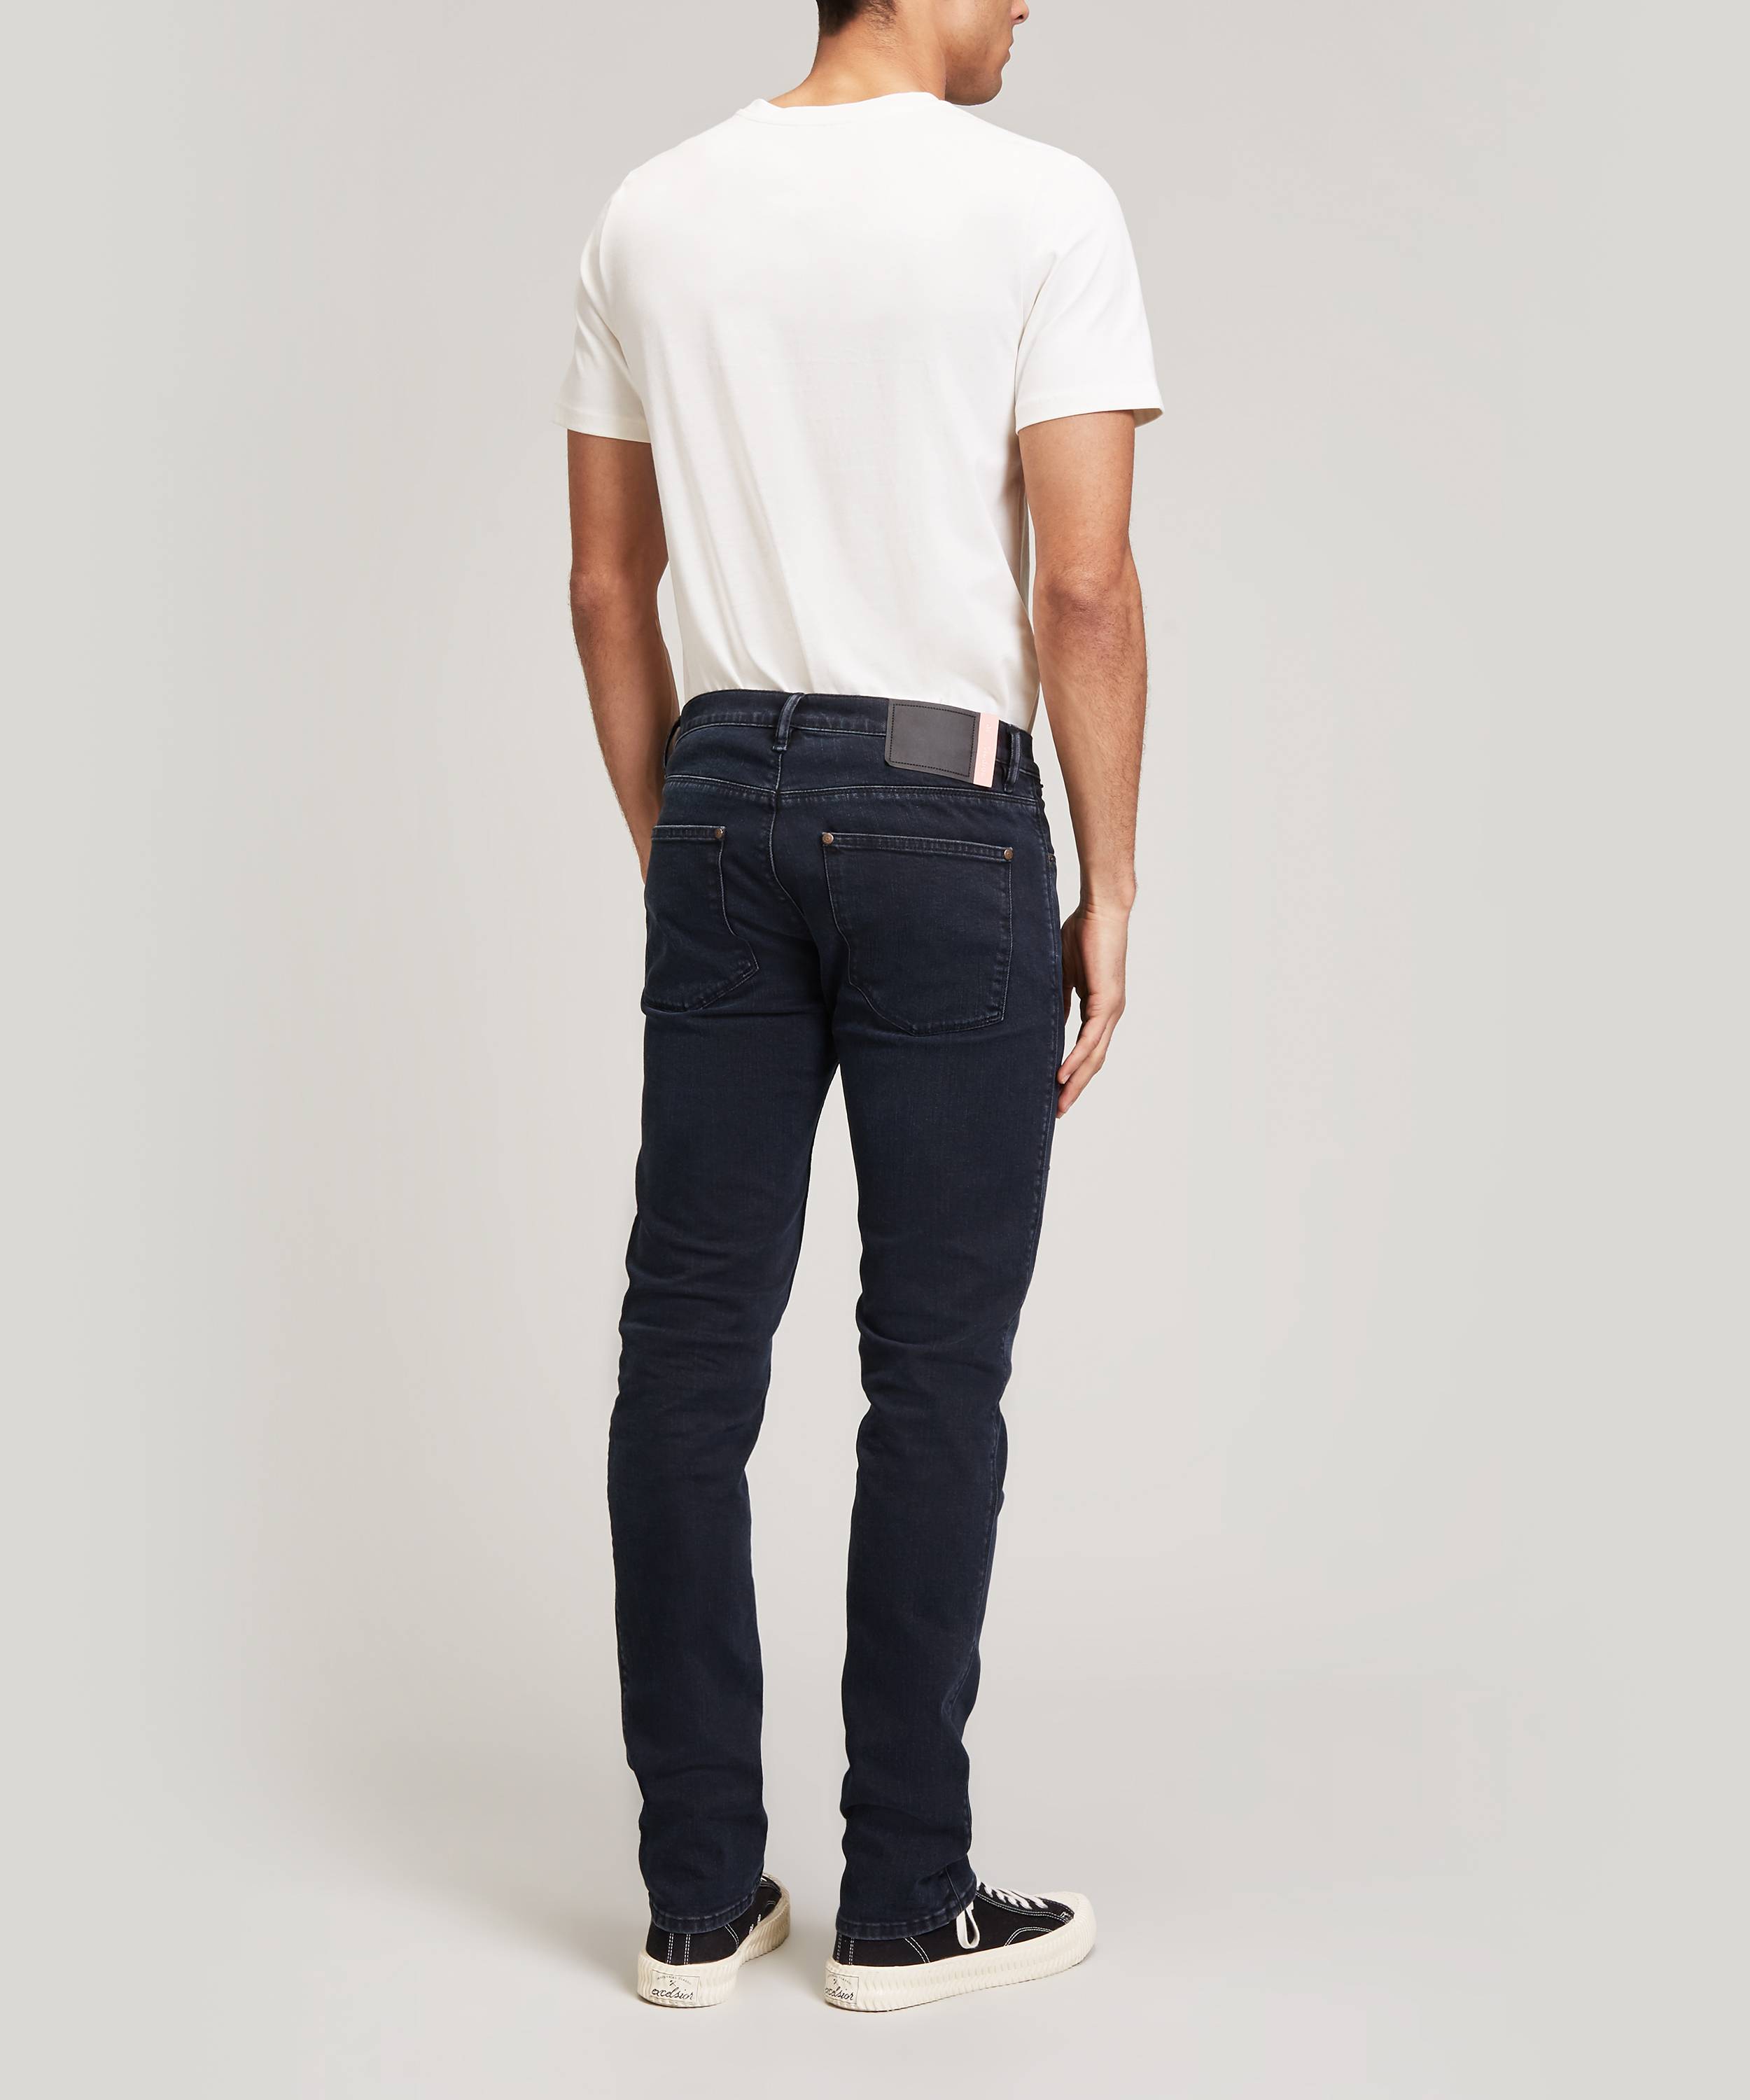 Tranquility Kostbar Ejeren Acne Studios Max Blue Jeans | Liberty